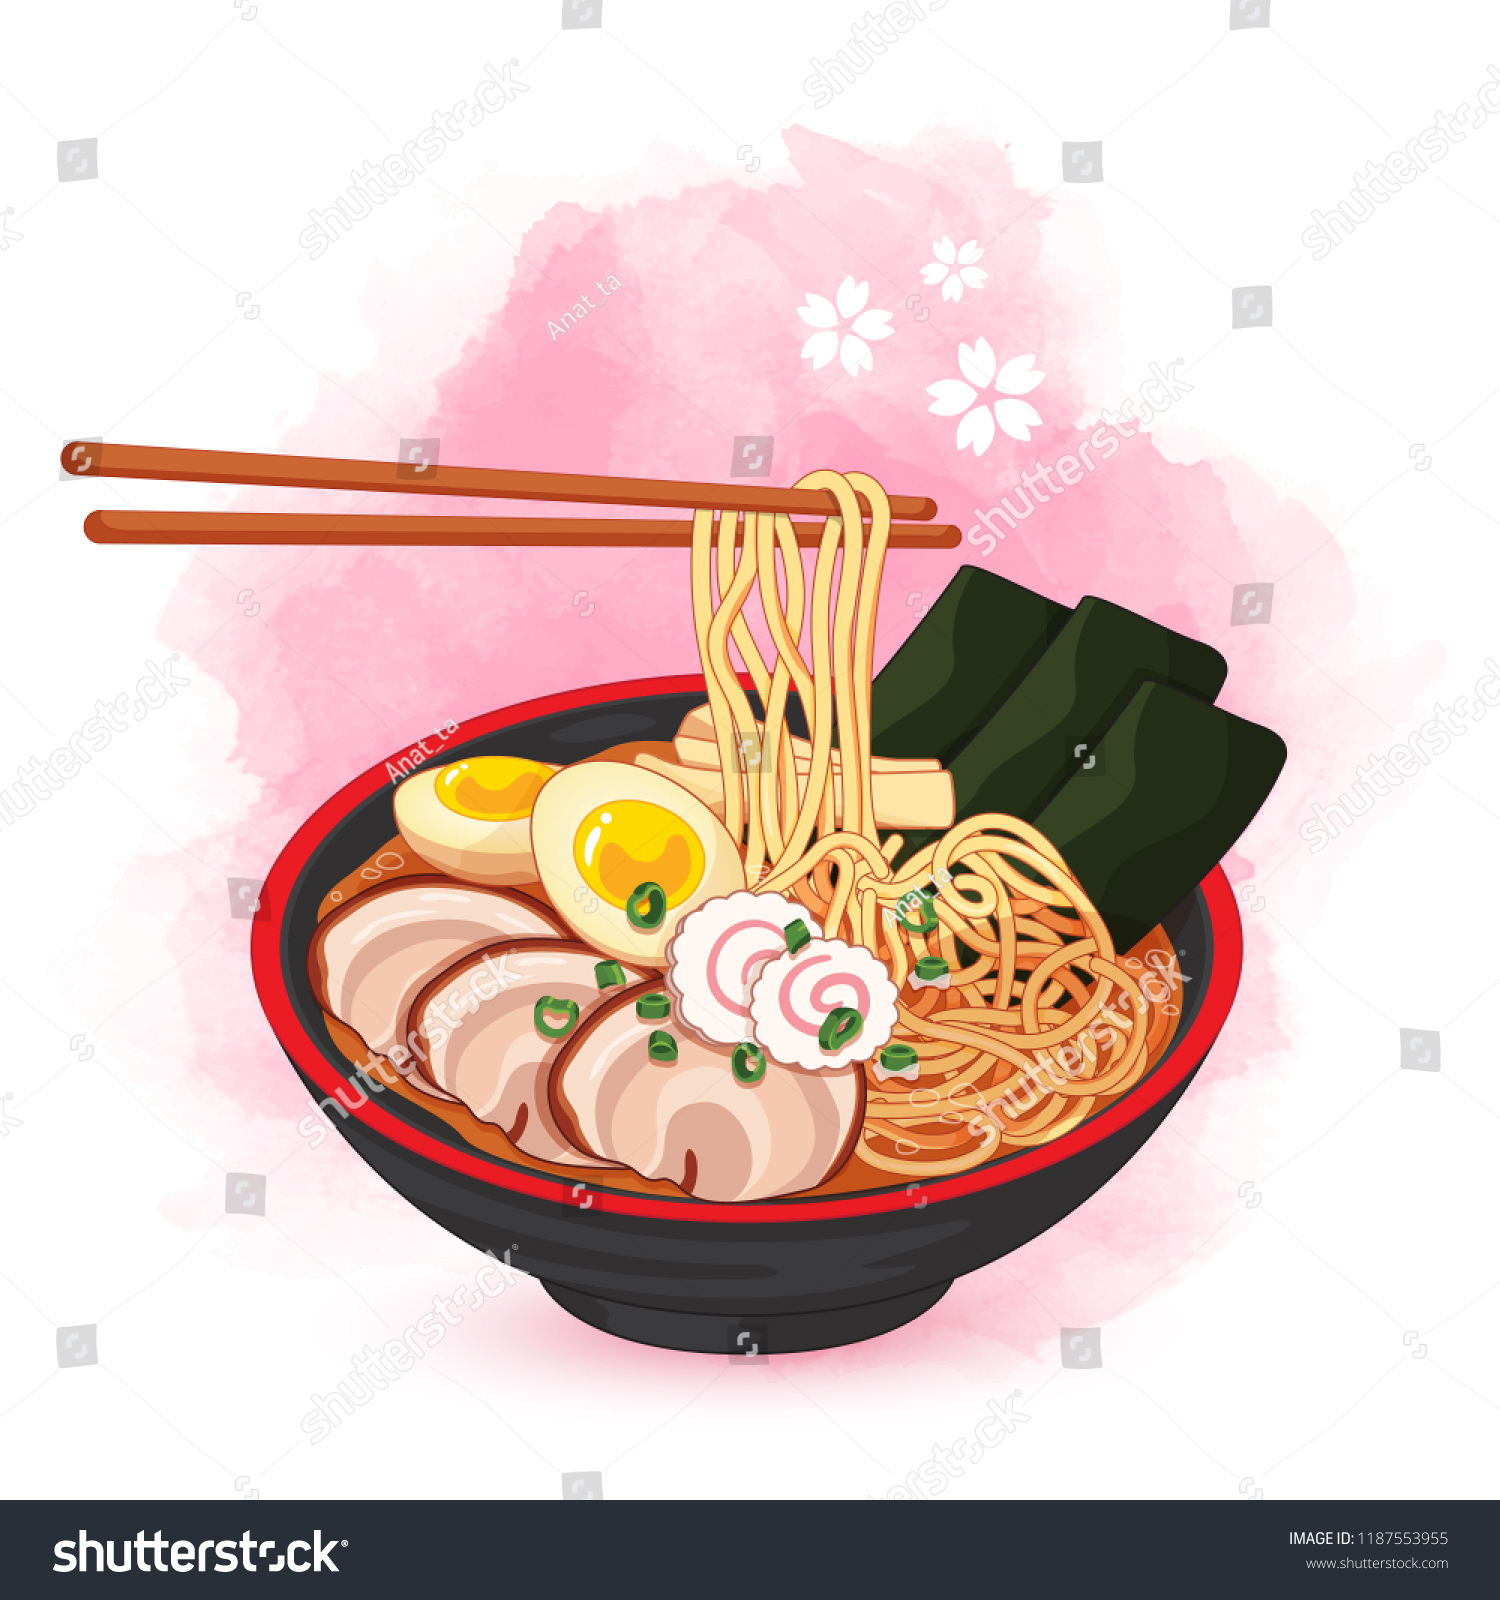 SVG of Ramen bowl on watercolor background. Toppings include eggs, sliced chashu pork, seaweed, bamboo shoots and naruto fish cake. svg